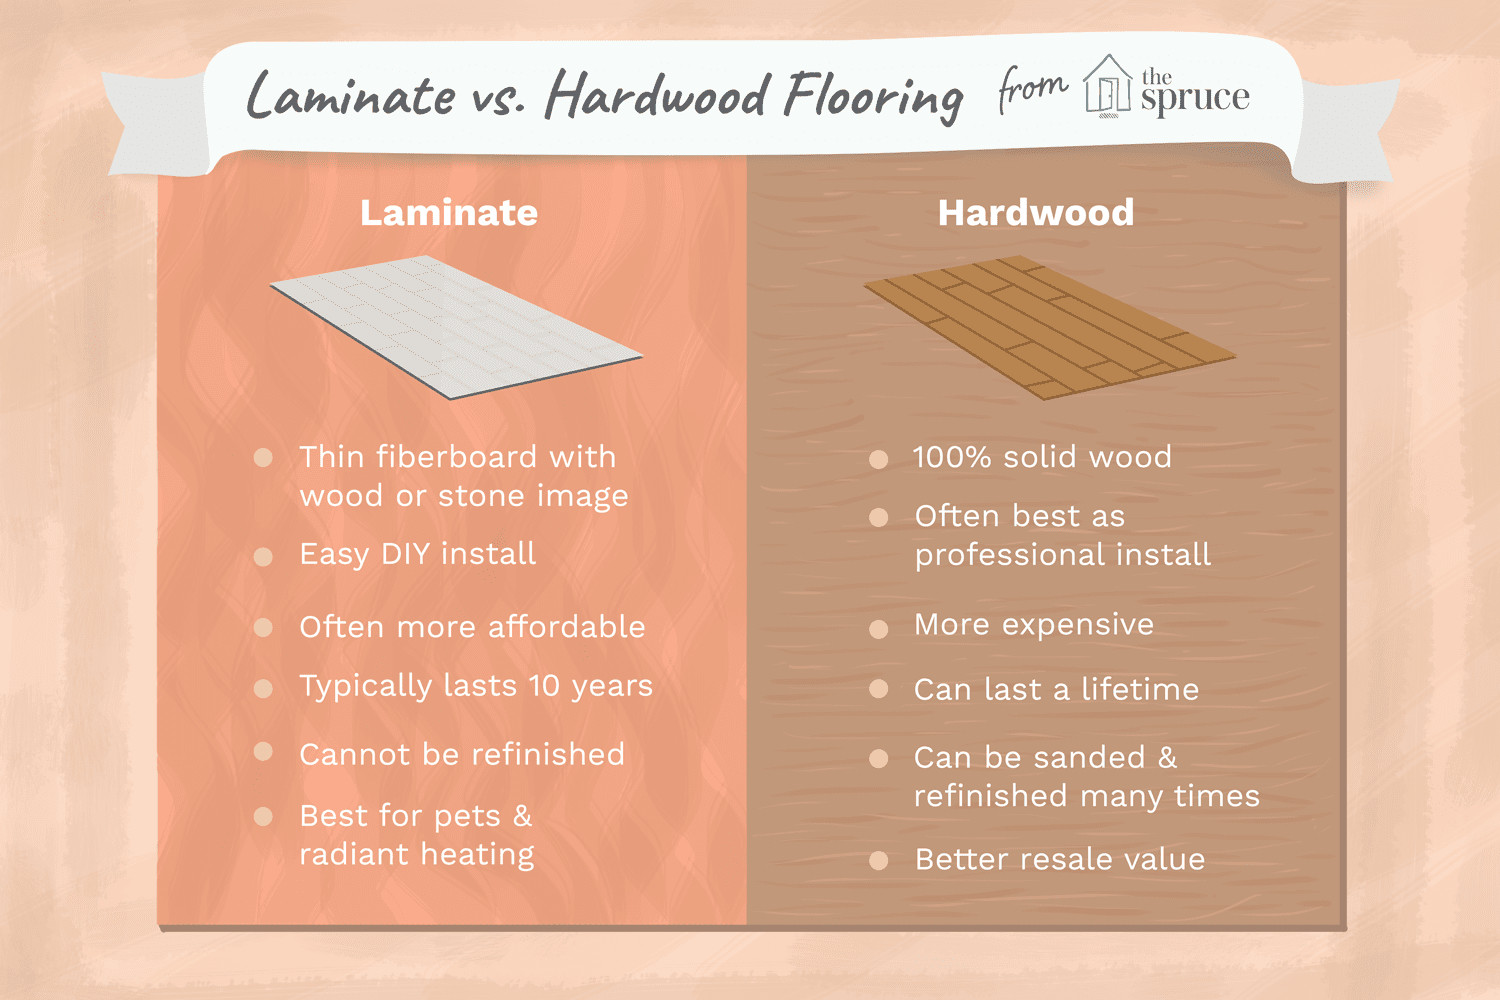 20 Perfect Engineered Vs solid Hardwood Flooring 2023 free download engineered vs solid hardwood flooring of laminate vs hardwood doesnt have to be a hard decision with regard to laminate vs hardwood flooring how they compare 1821870 final 5bae84f24cedfd0026